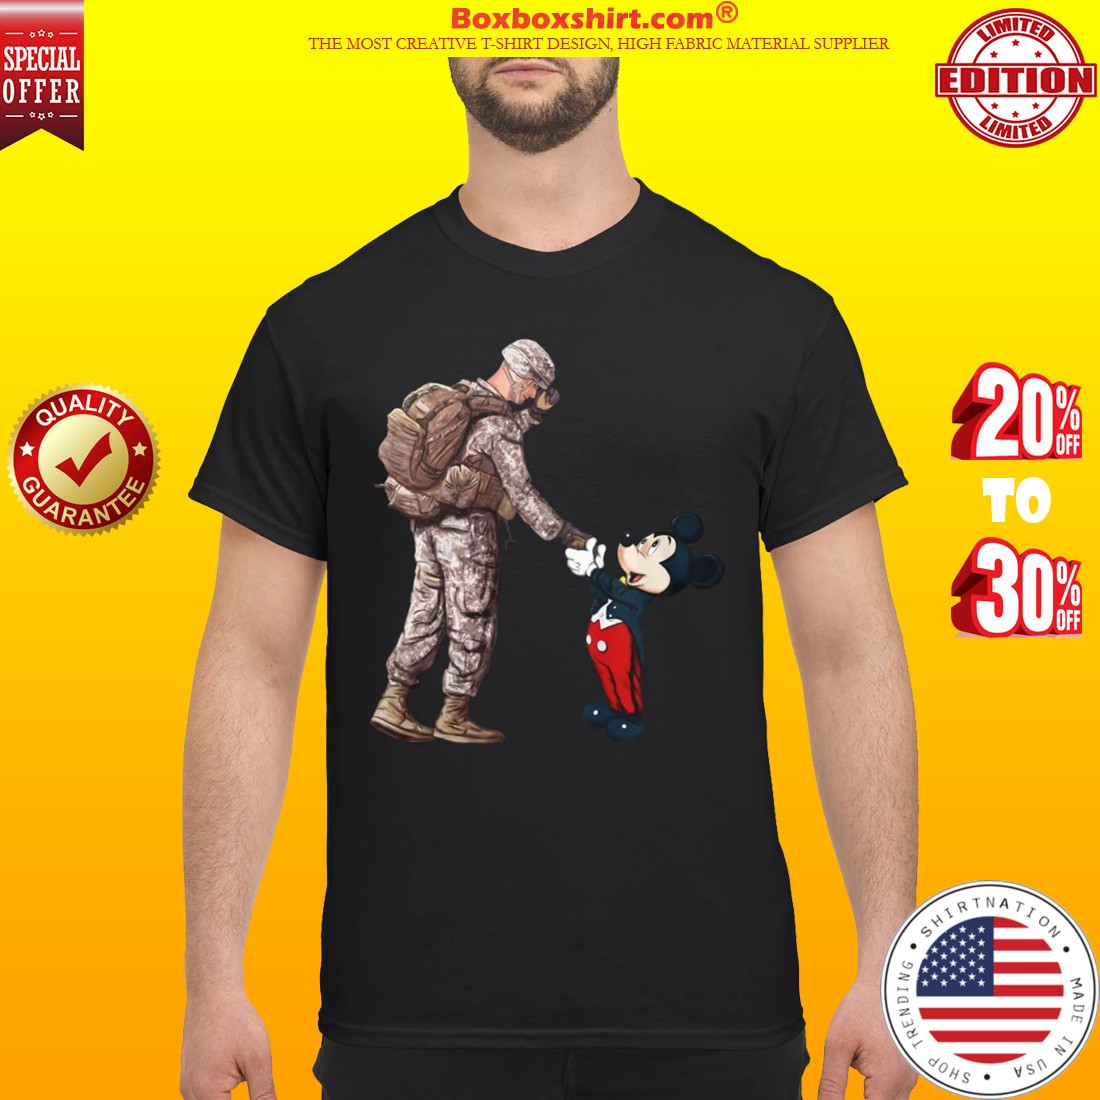 Mickey mouse and veteran soldier shirt